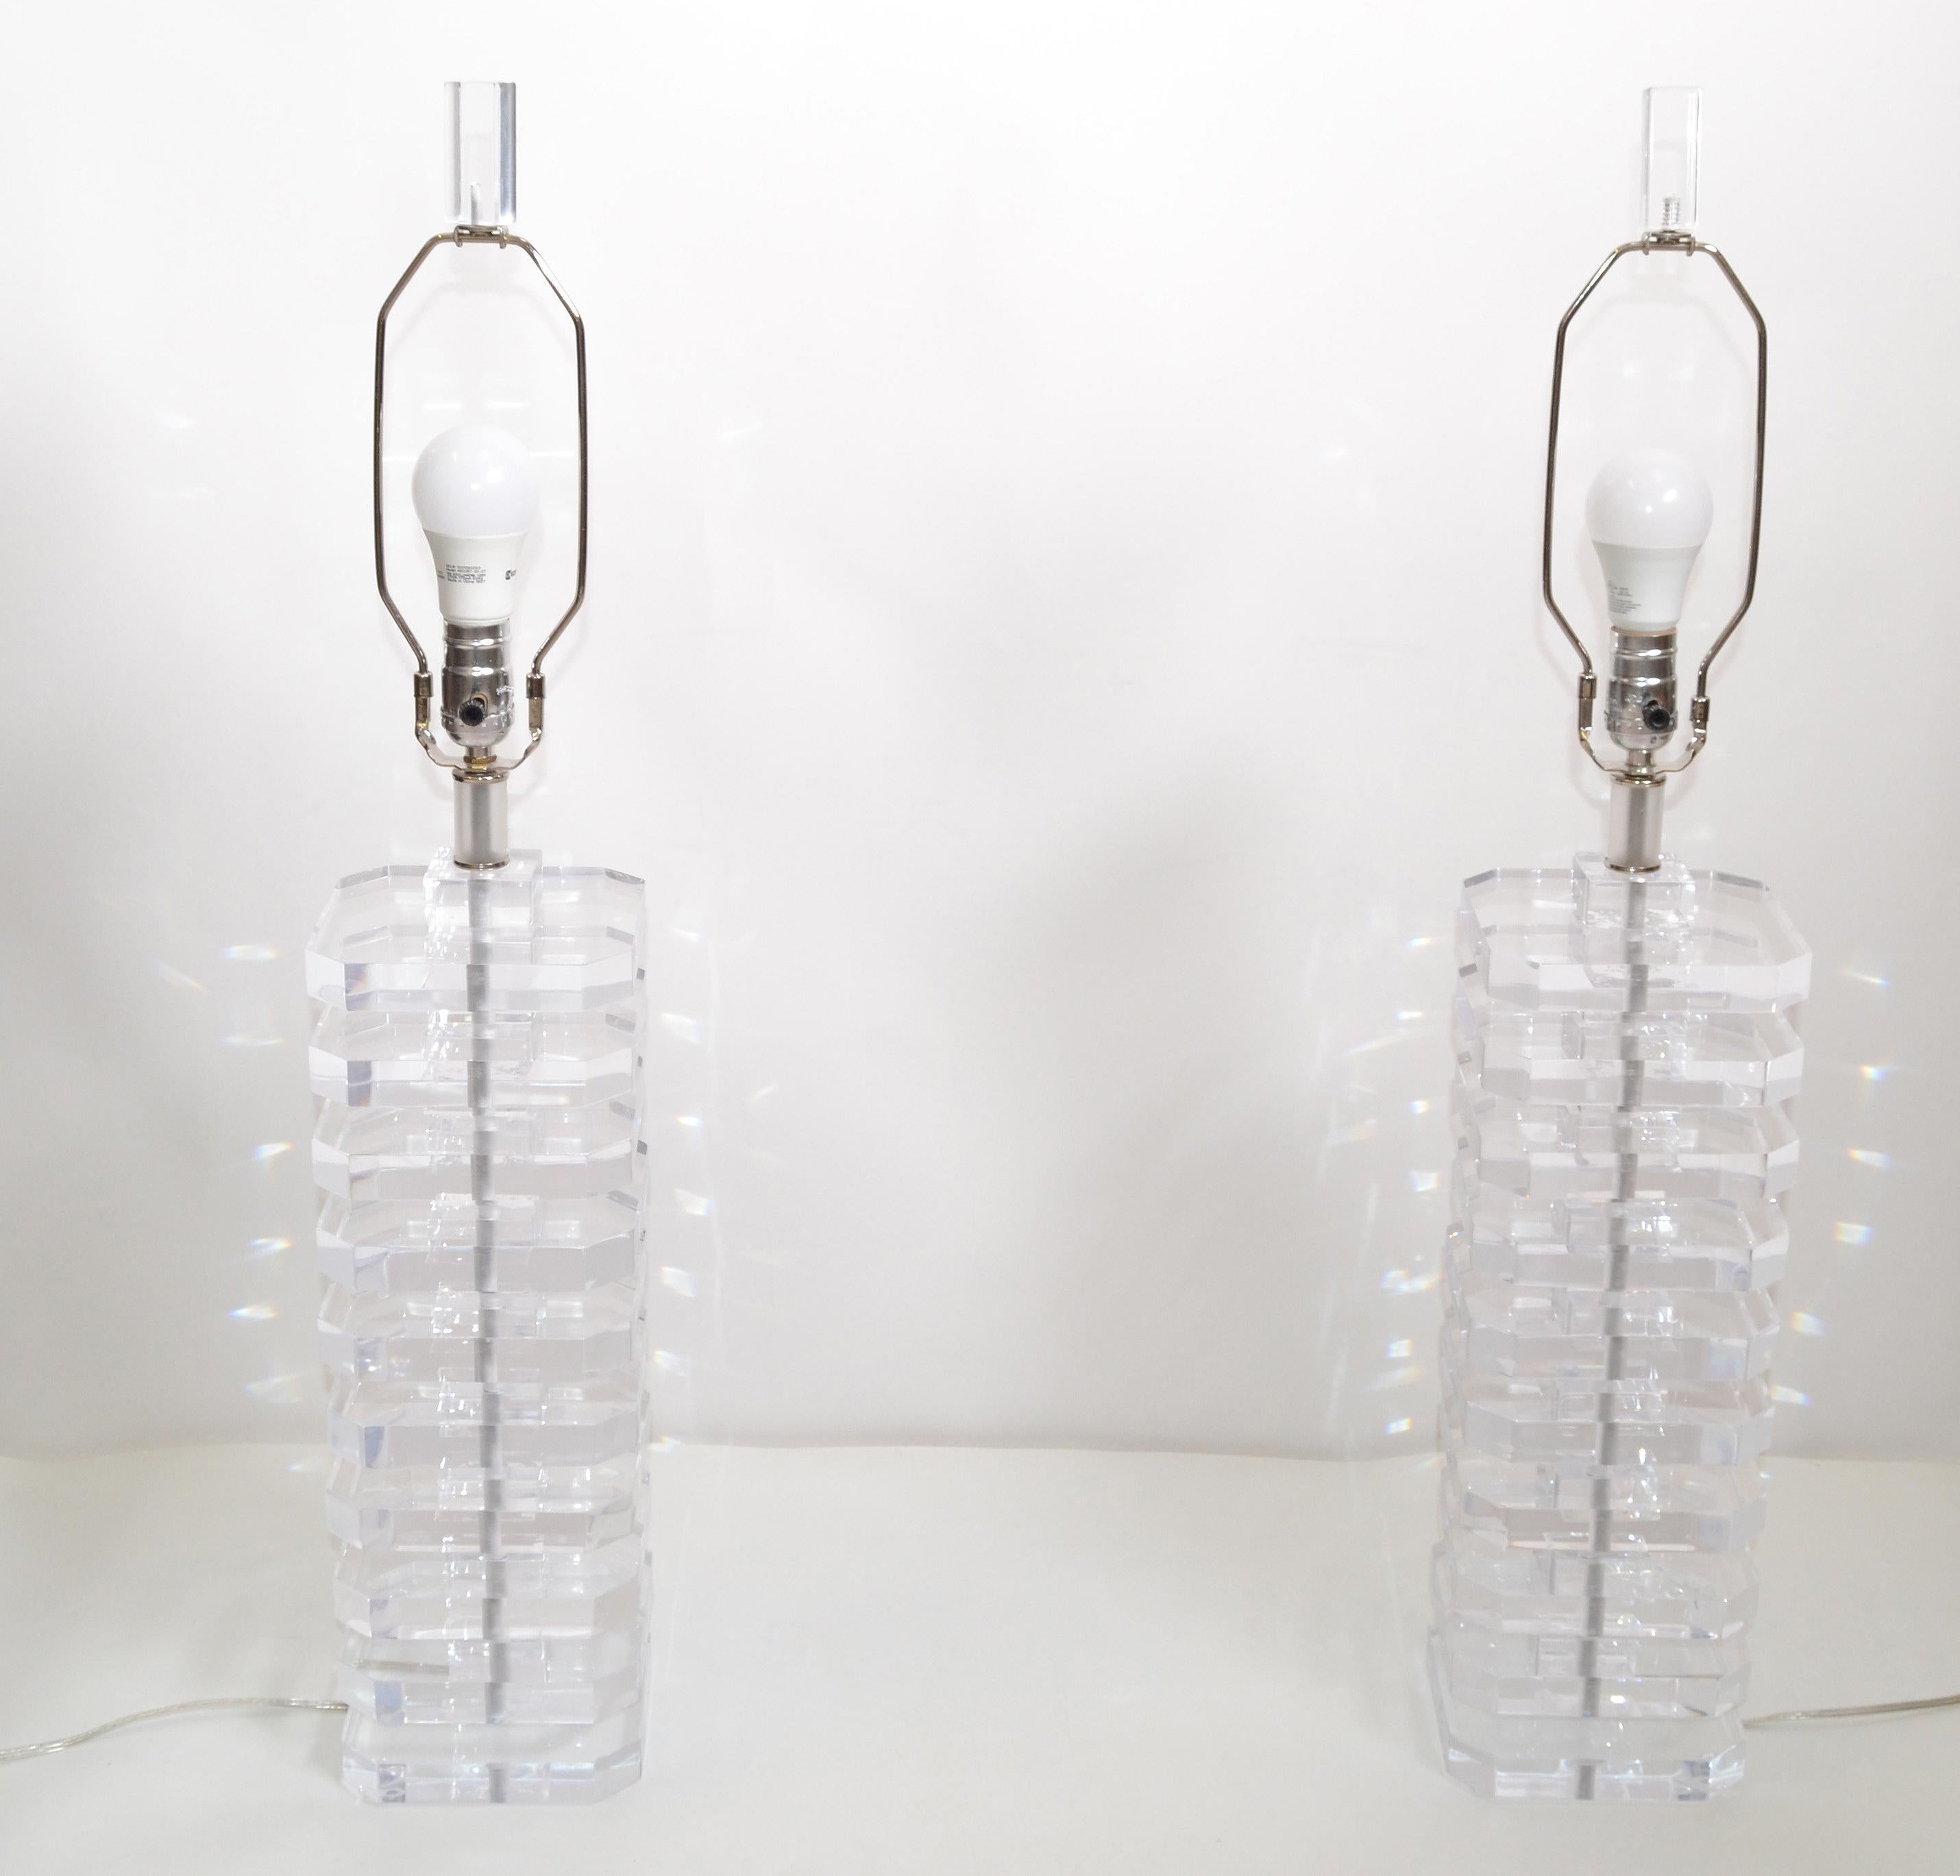 Pair of transparent stacked Mid-Century Modern Lucite table lamps.
Nickel hardware.
Wired for the U.S. and each takes a regular / LED bulb.
Sold with matching shades.